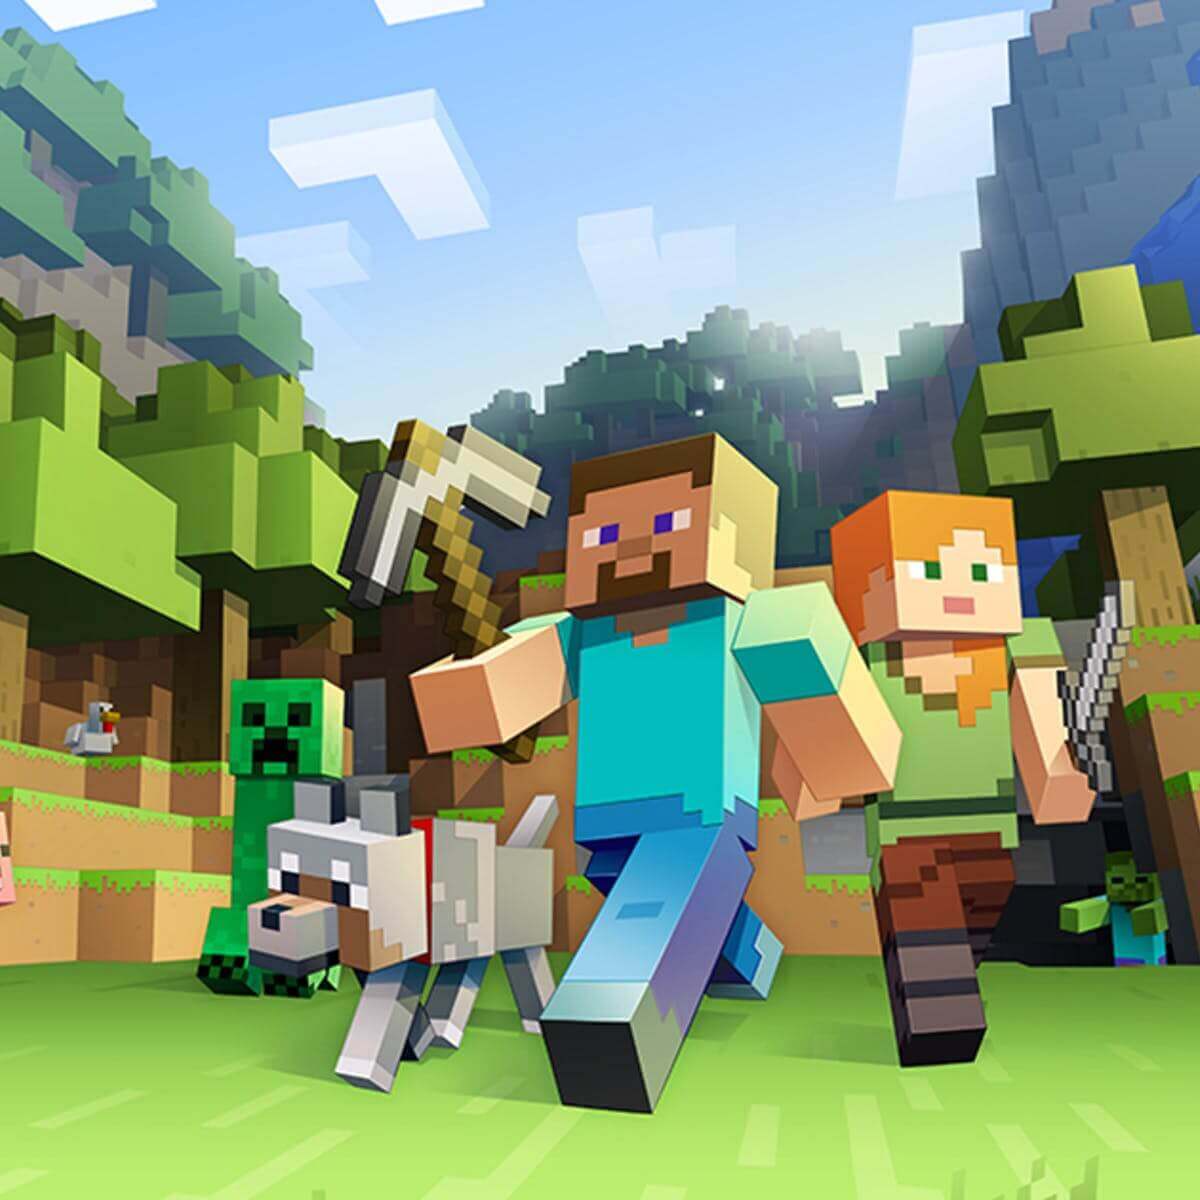 play minecraft java edition on pc with friends on xbox on local network